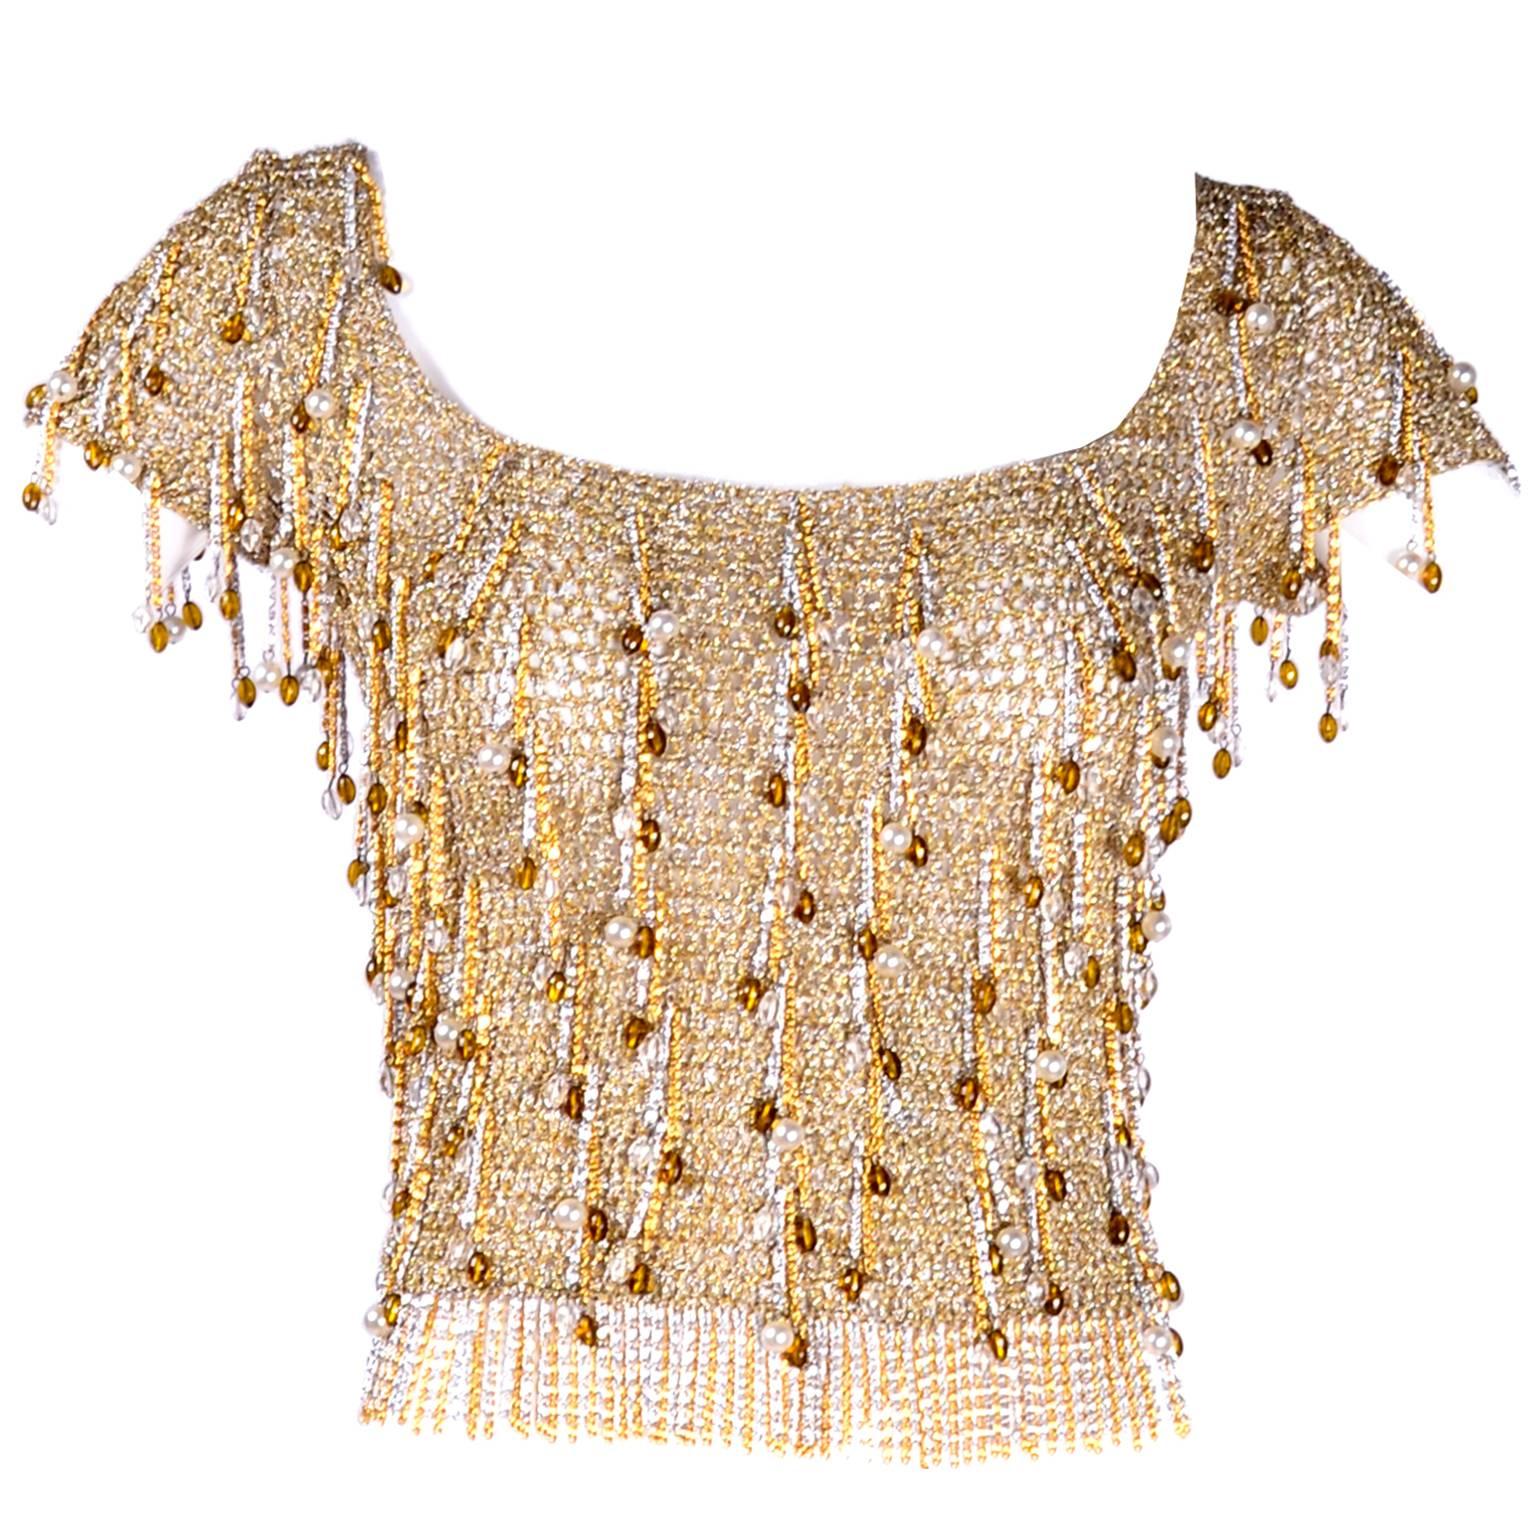 Loris Azzaro Beaded Silver and Gold Metallic Crochet Top with Chains, 1970s